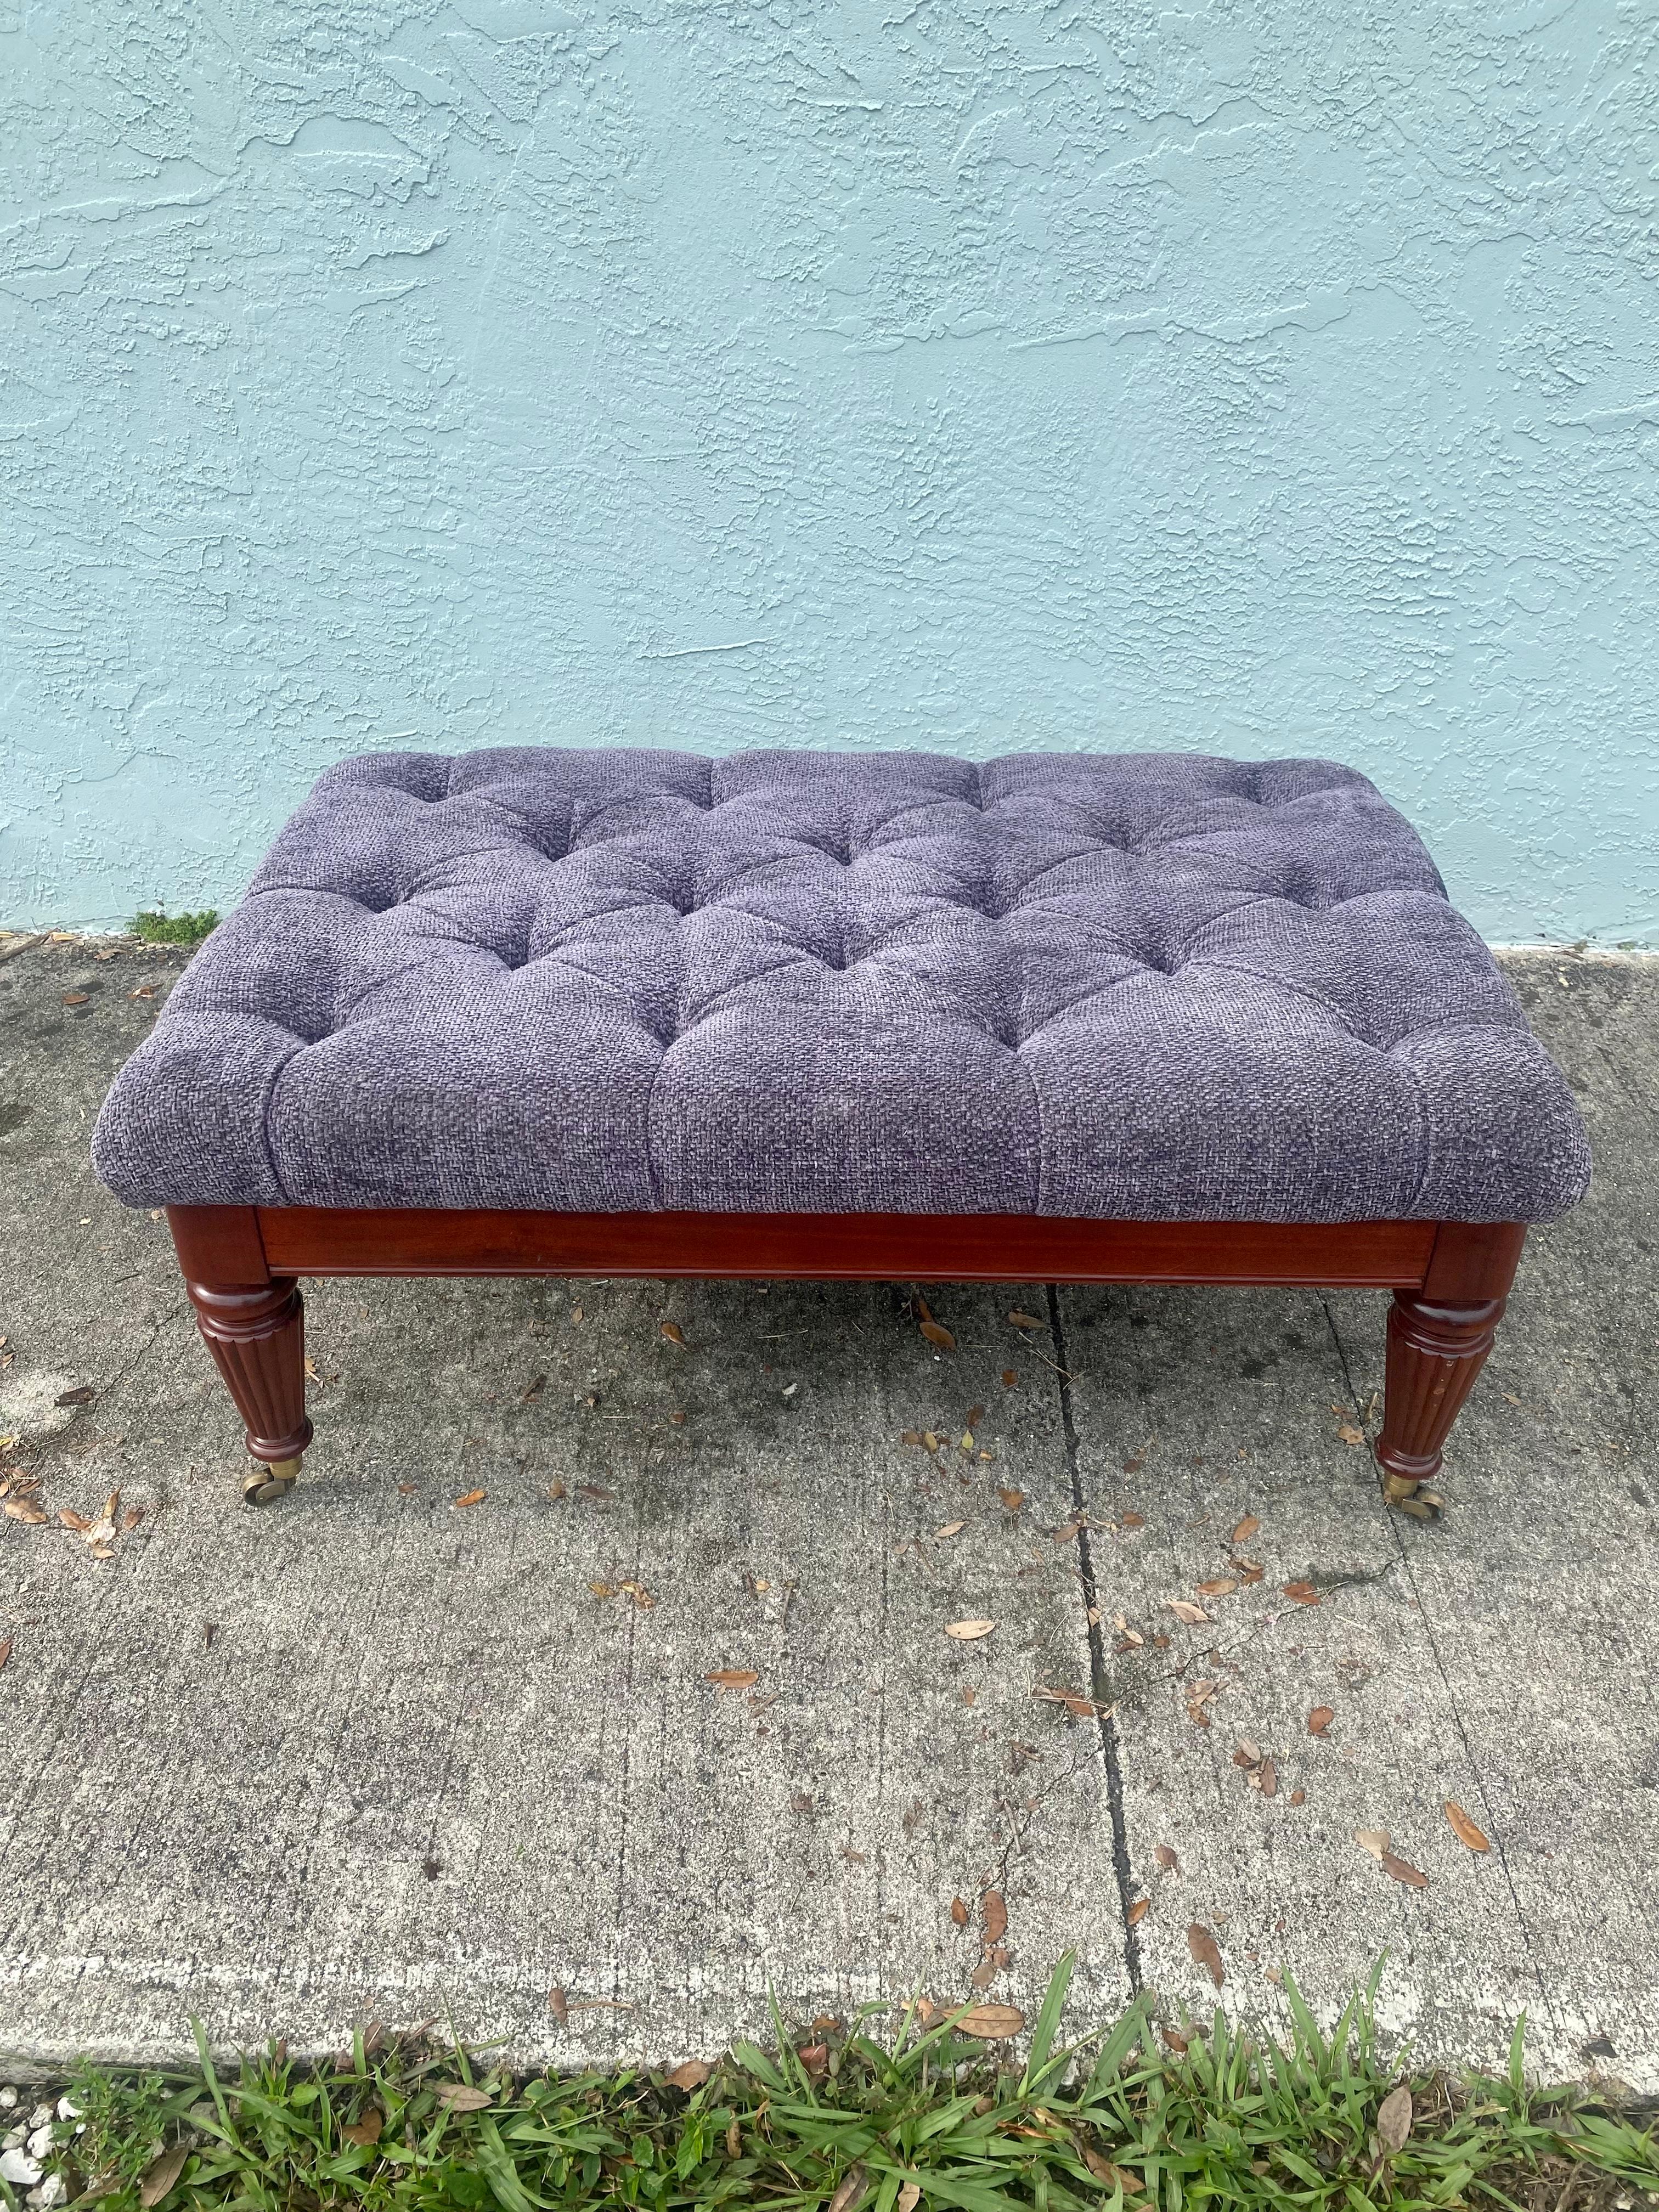 On offer on this occasion is one of the most stunning bench you could hope to find. This is an ultra-rare opportunity to acquire what is, unequivocally, the best of the best, it being a most spectacular and beautifully-presented bench or coffee